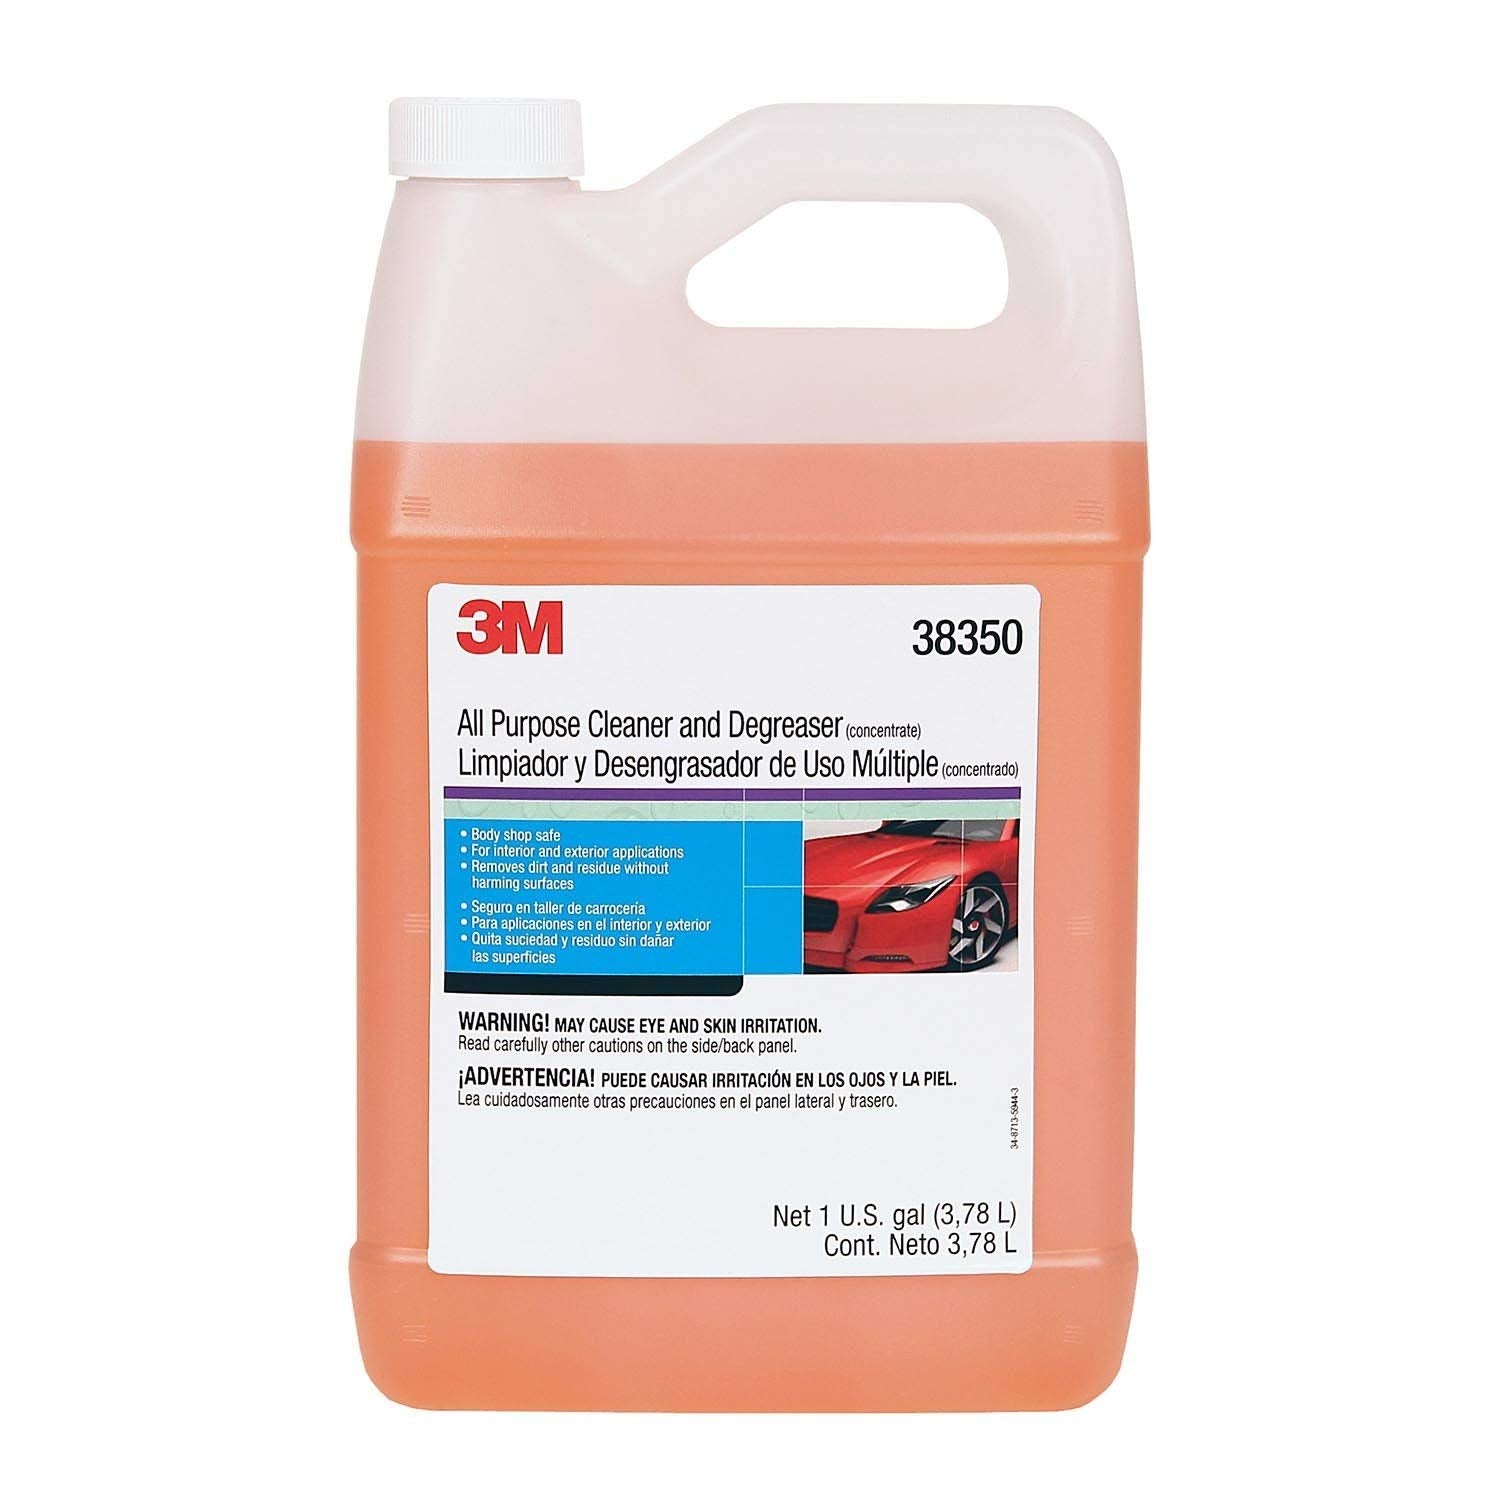 3M All Purpose Cleaner & Degreaser, 1 Gallon